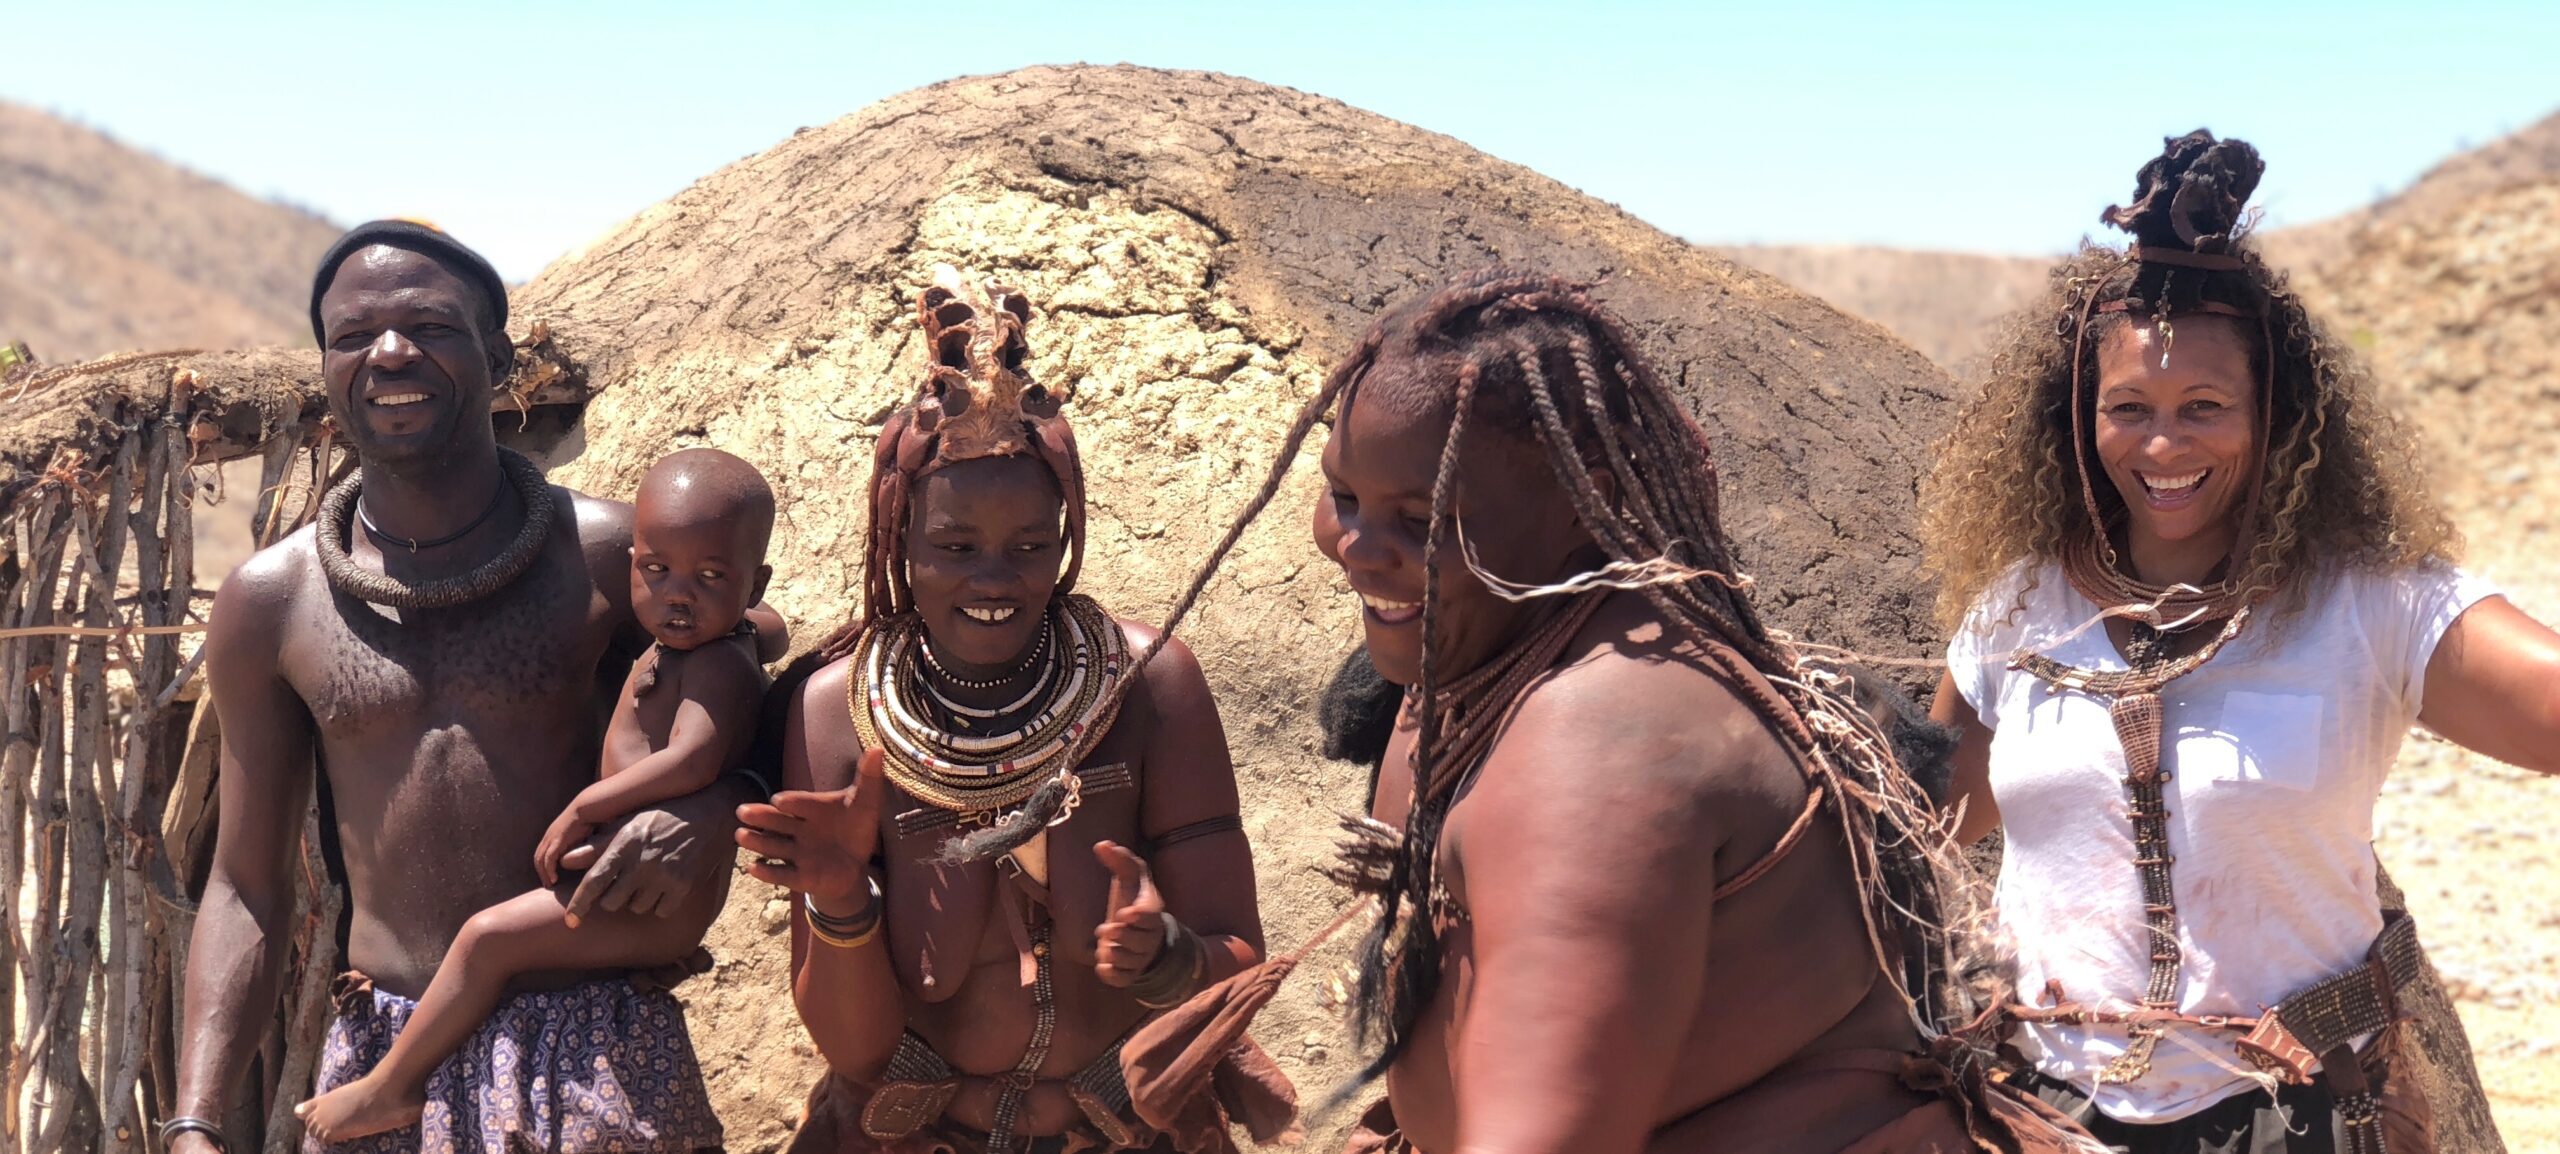 Woman dancing in celebrating with few Himba people in the Kaokoland region